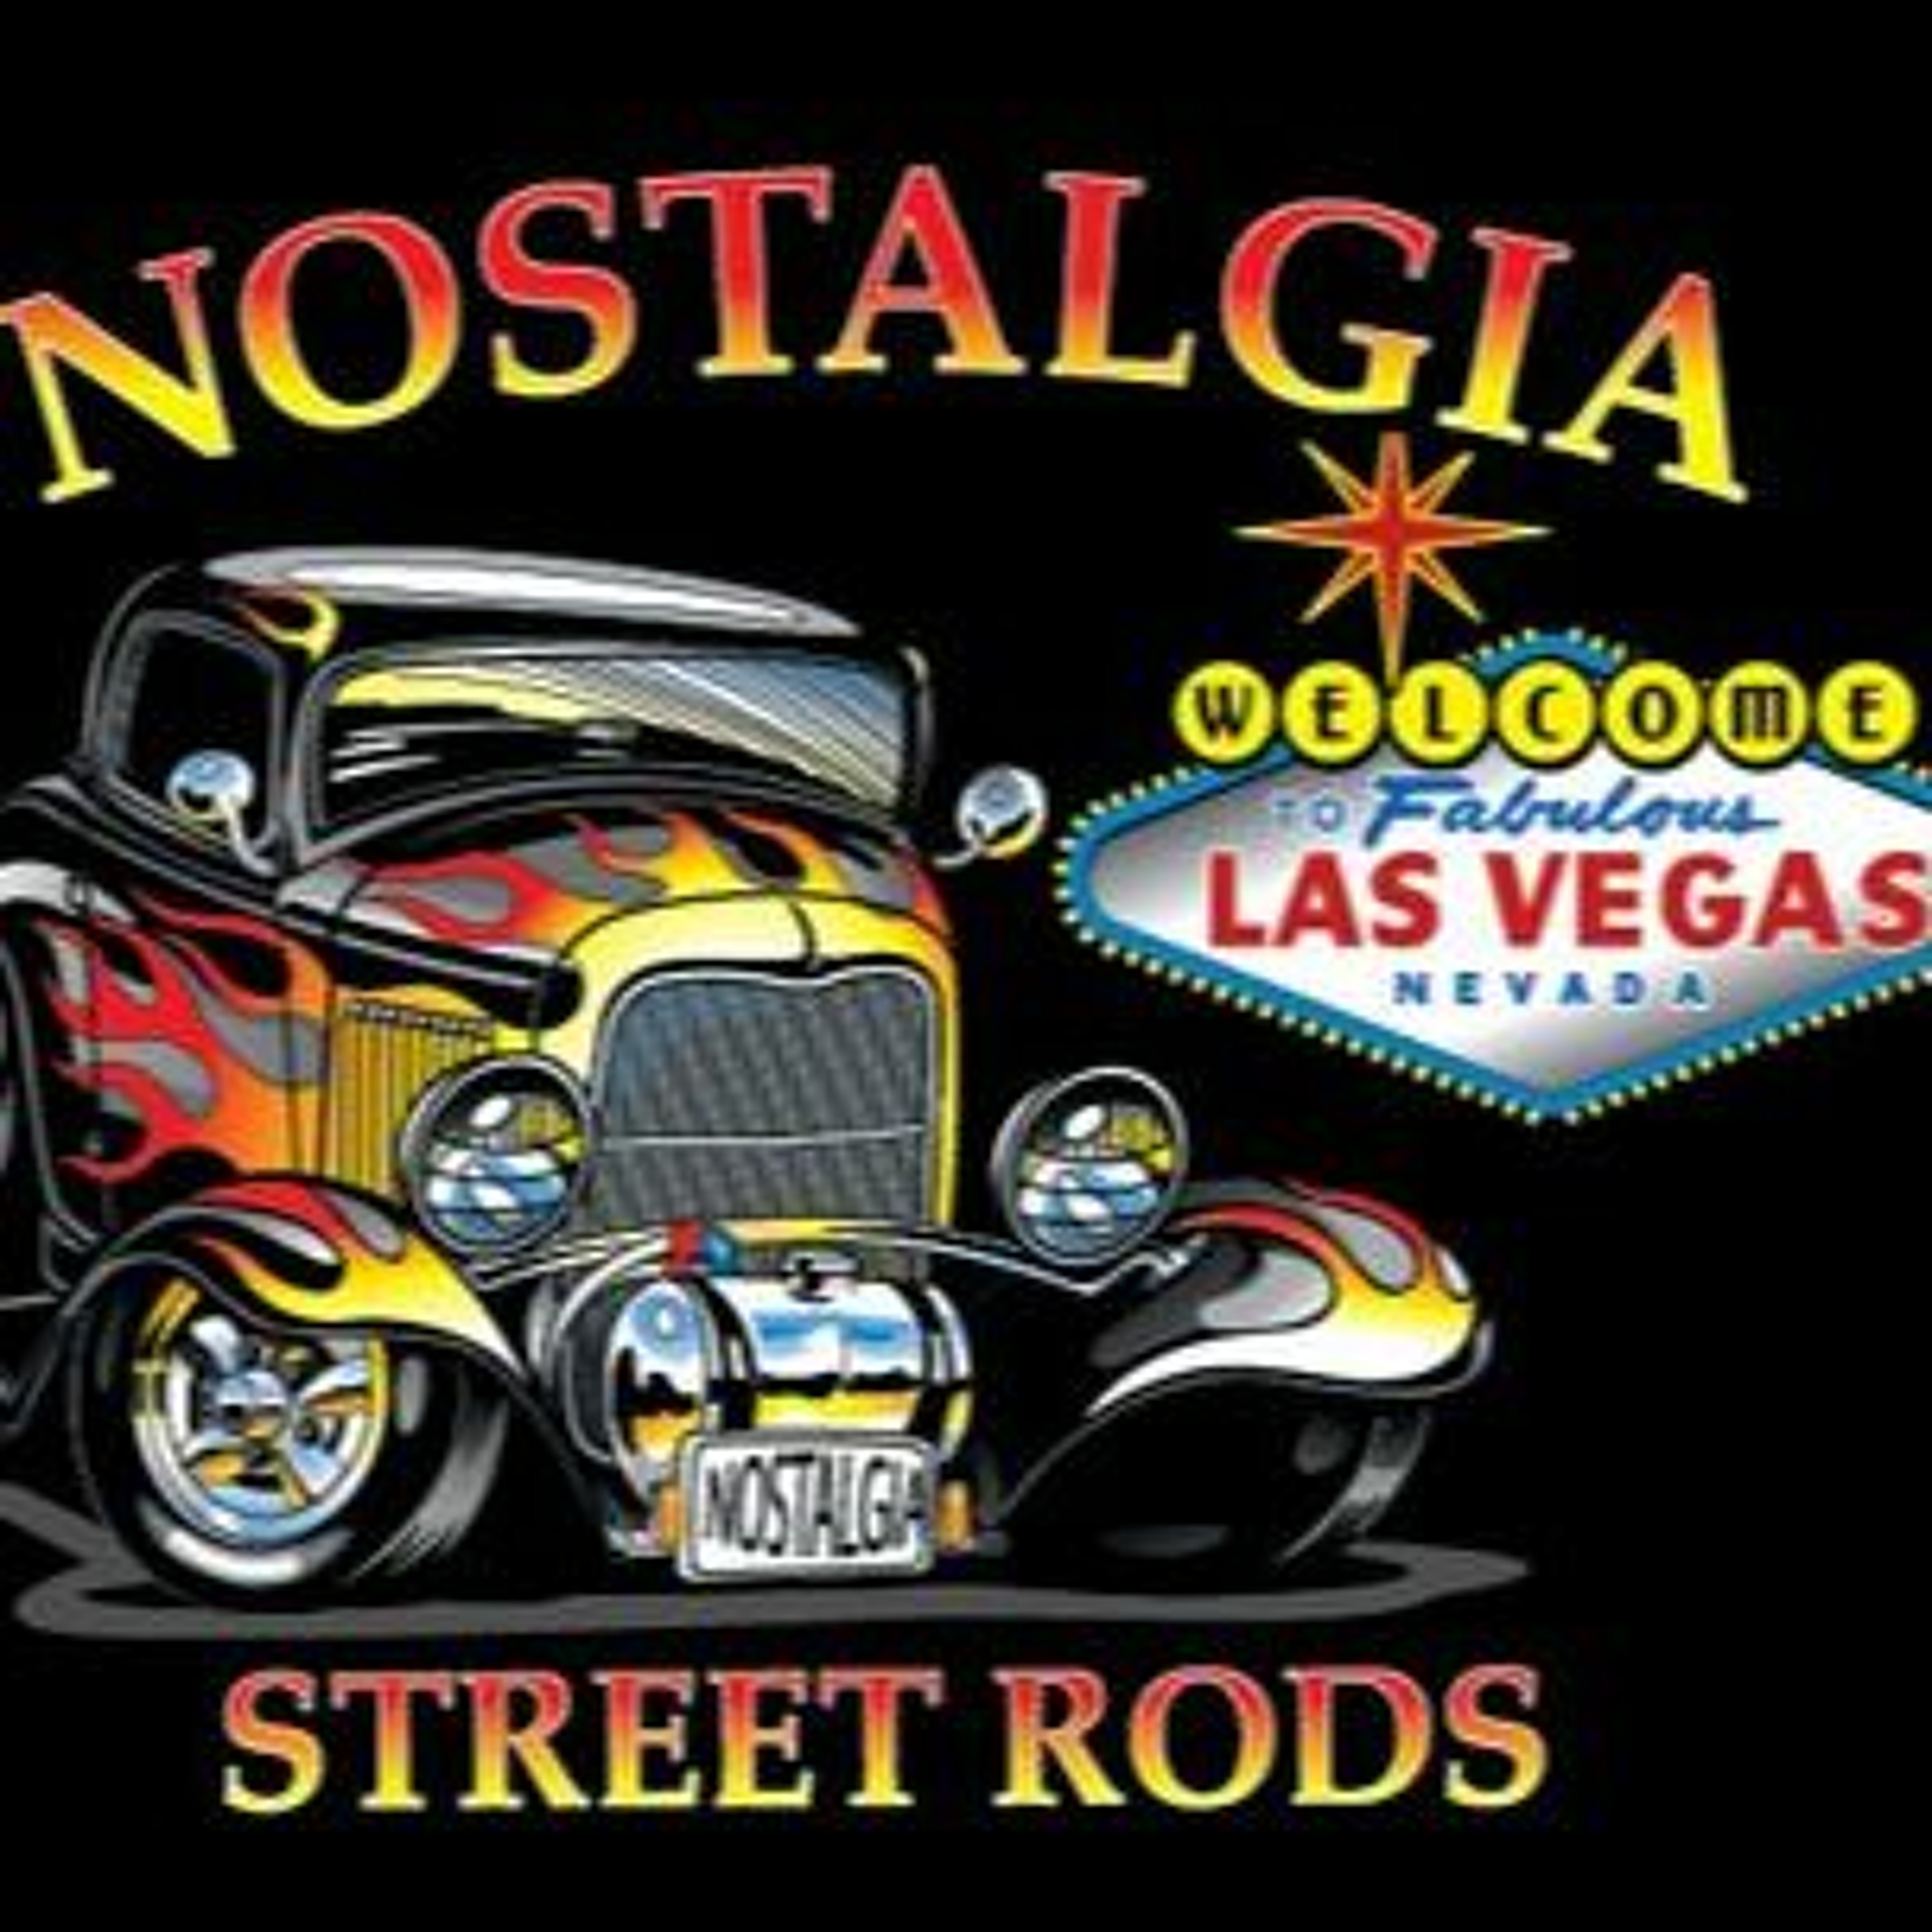 VNS PODCAST - FROM AUGUST 14, 2021 - NOSTALGIA STREET RODS